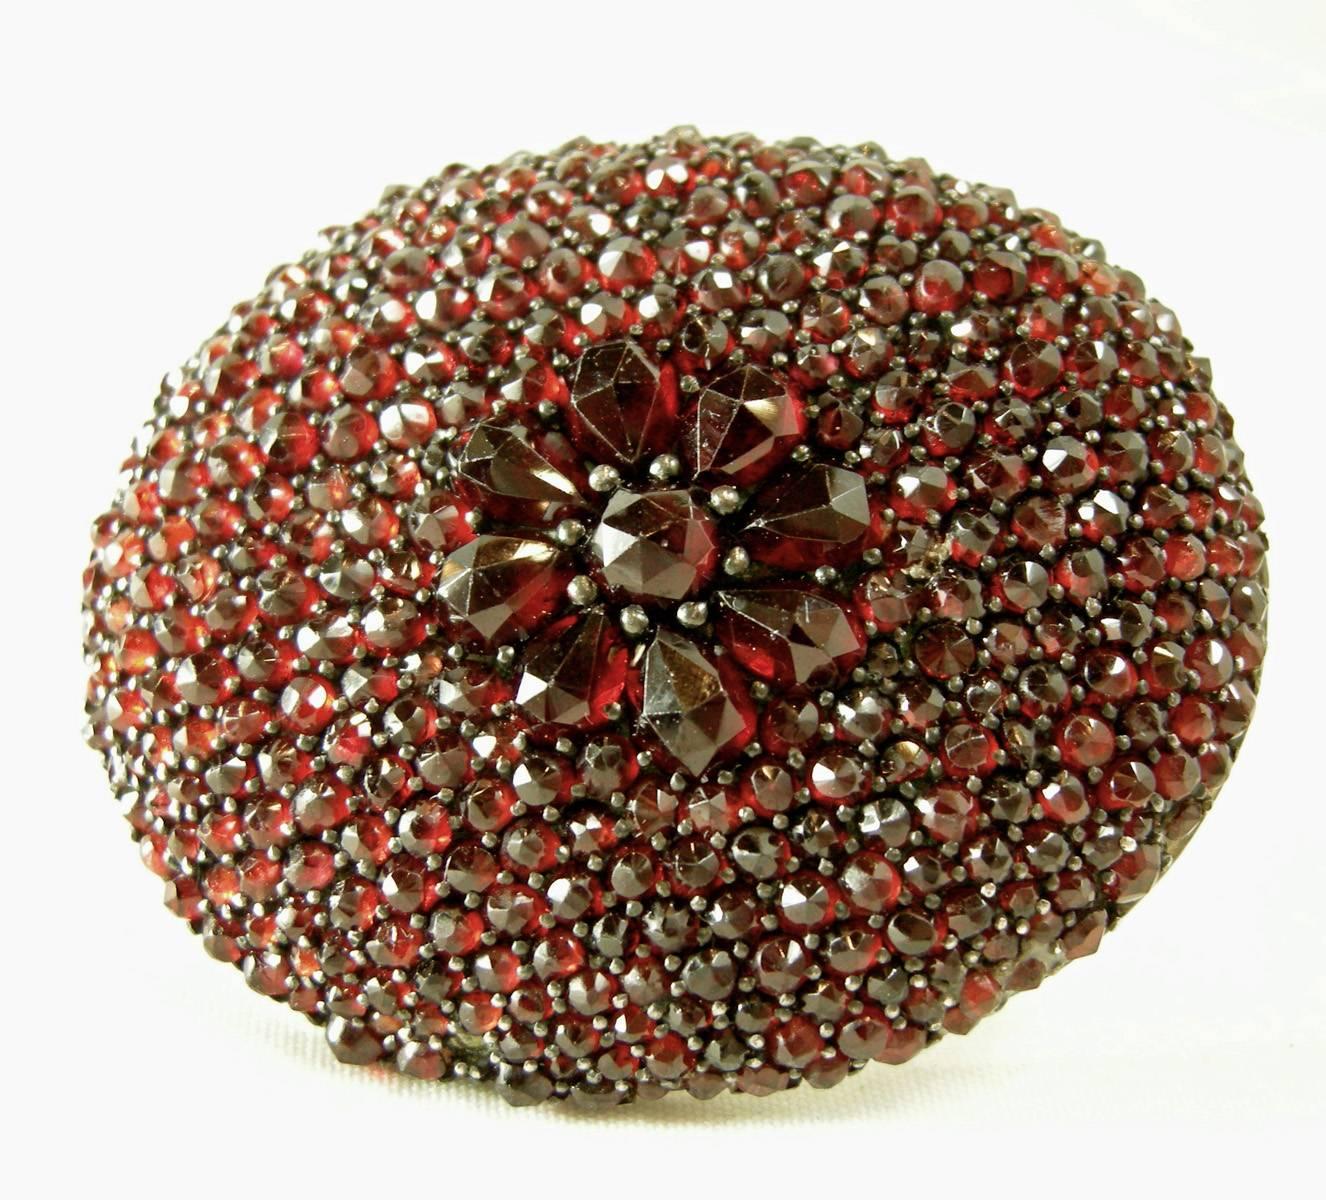 This fabulous Edwardian oval brooch has vibrant pave of garnets. It features a floral design in the center. It is made of sterling silver over a gold vermeil and measures 1-3/8” x 1-1/2” and is in excellent condition.